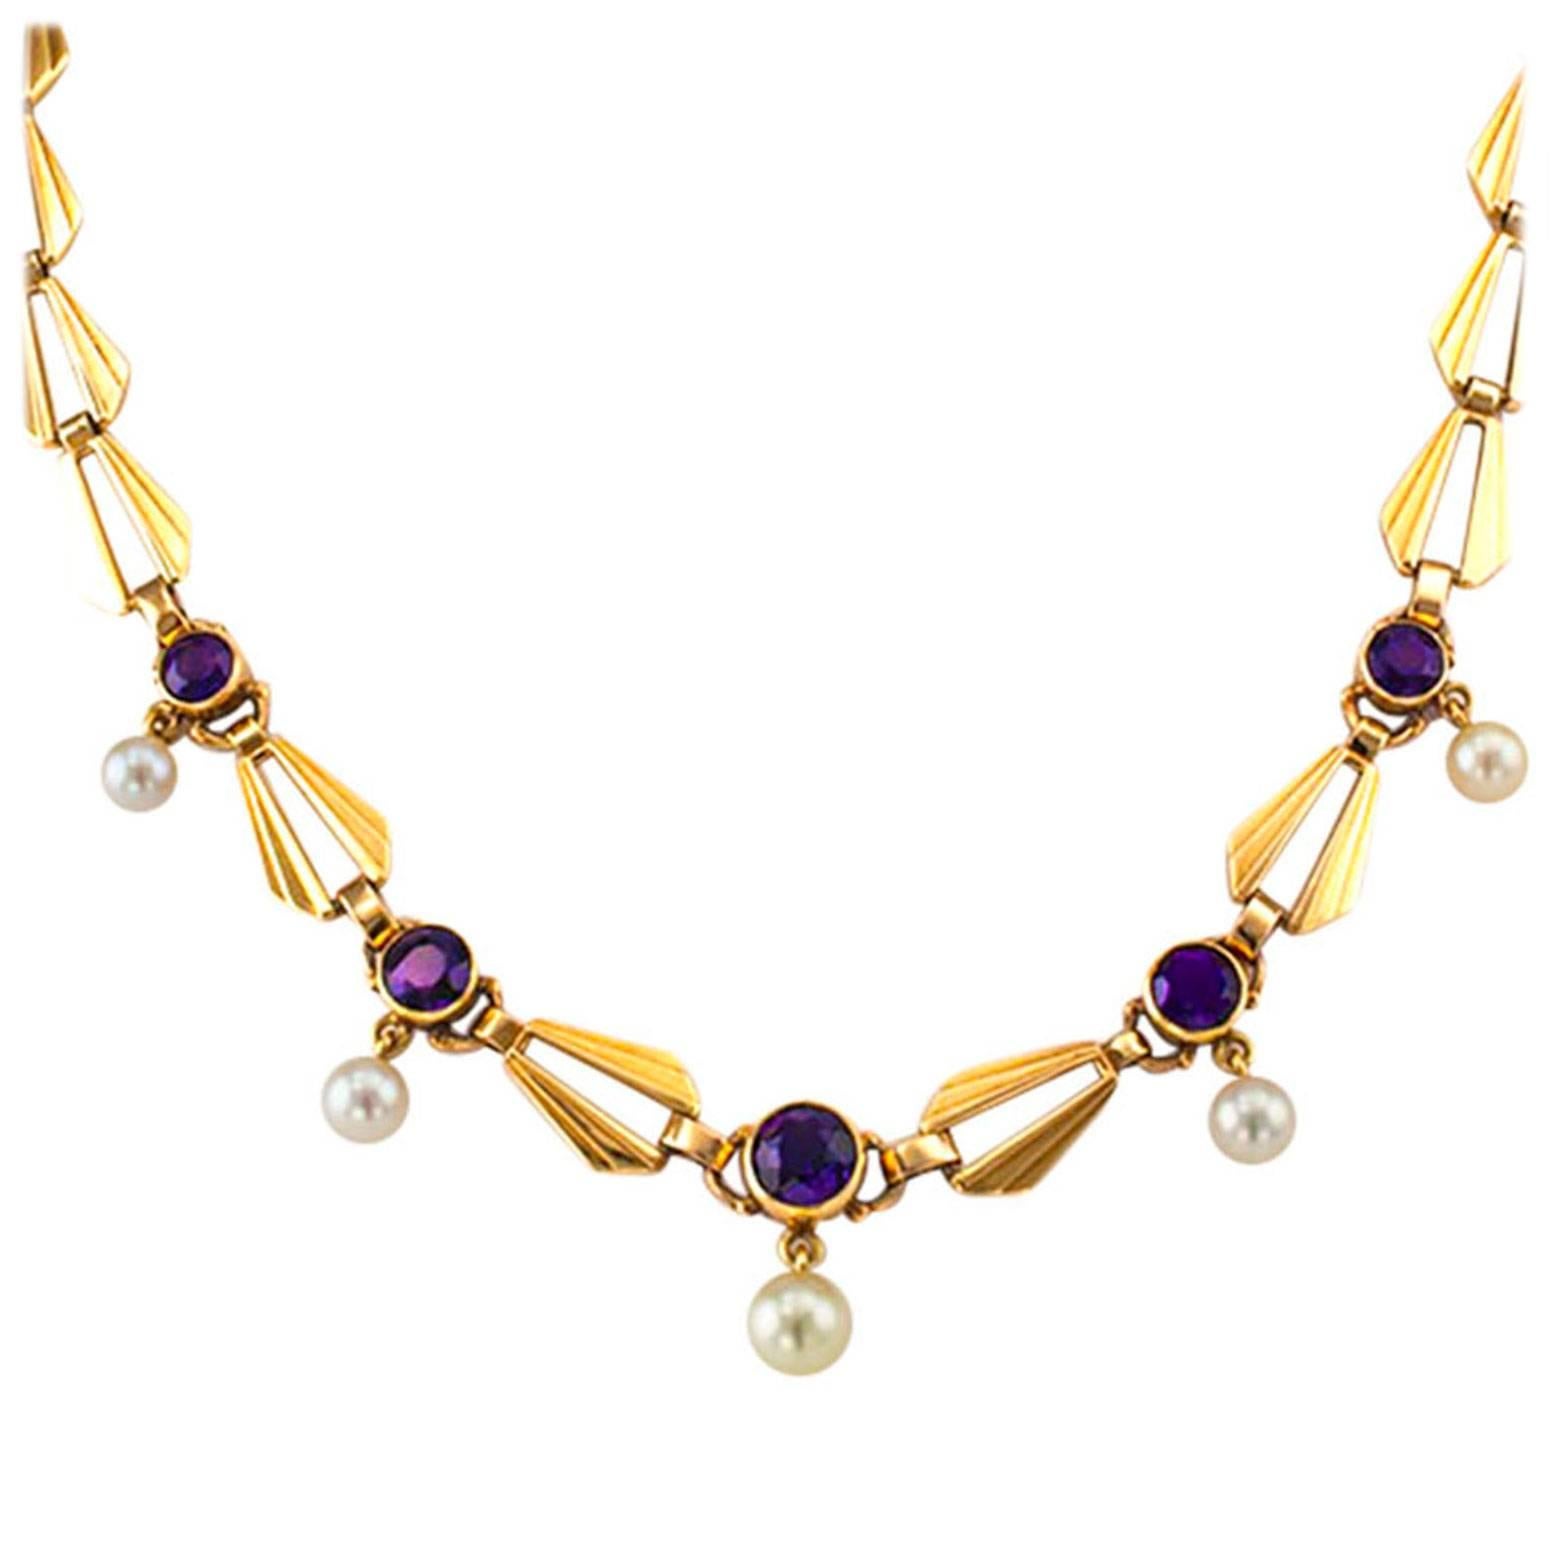 Retro Amethyst Cultured Pearl Gold Necklace